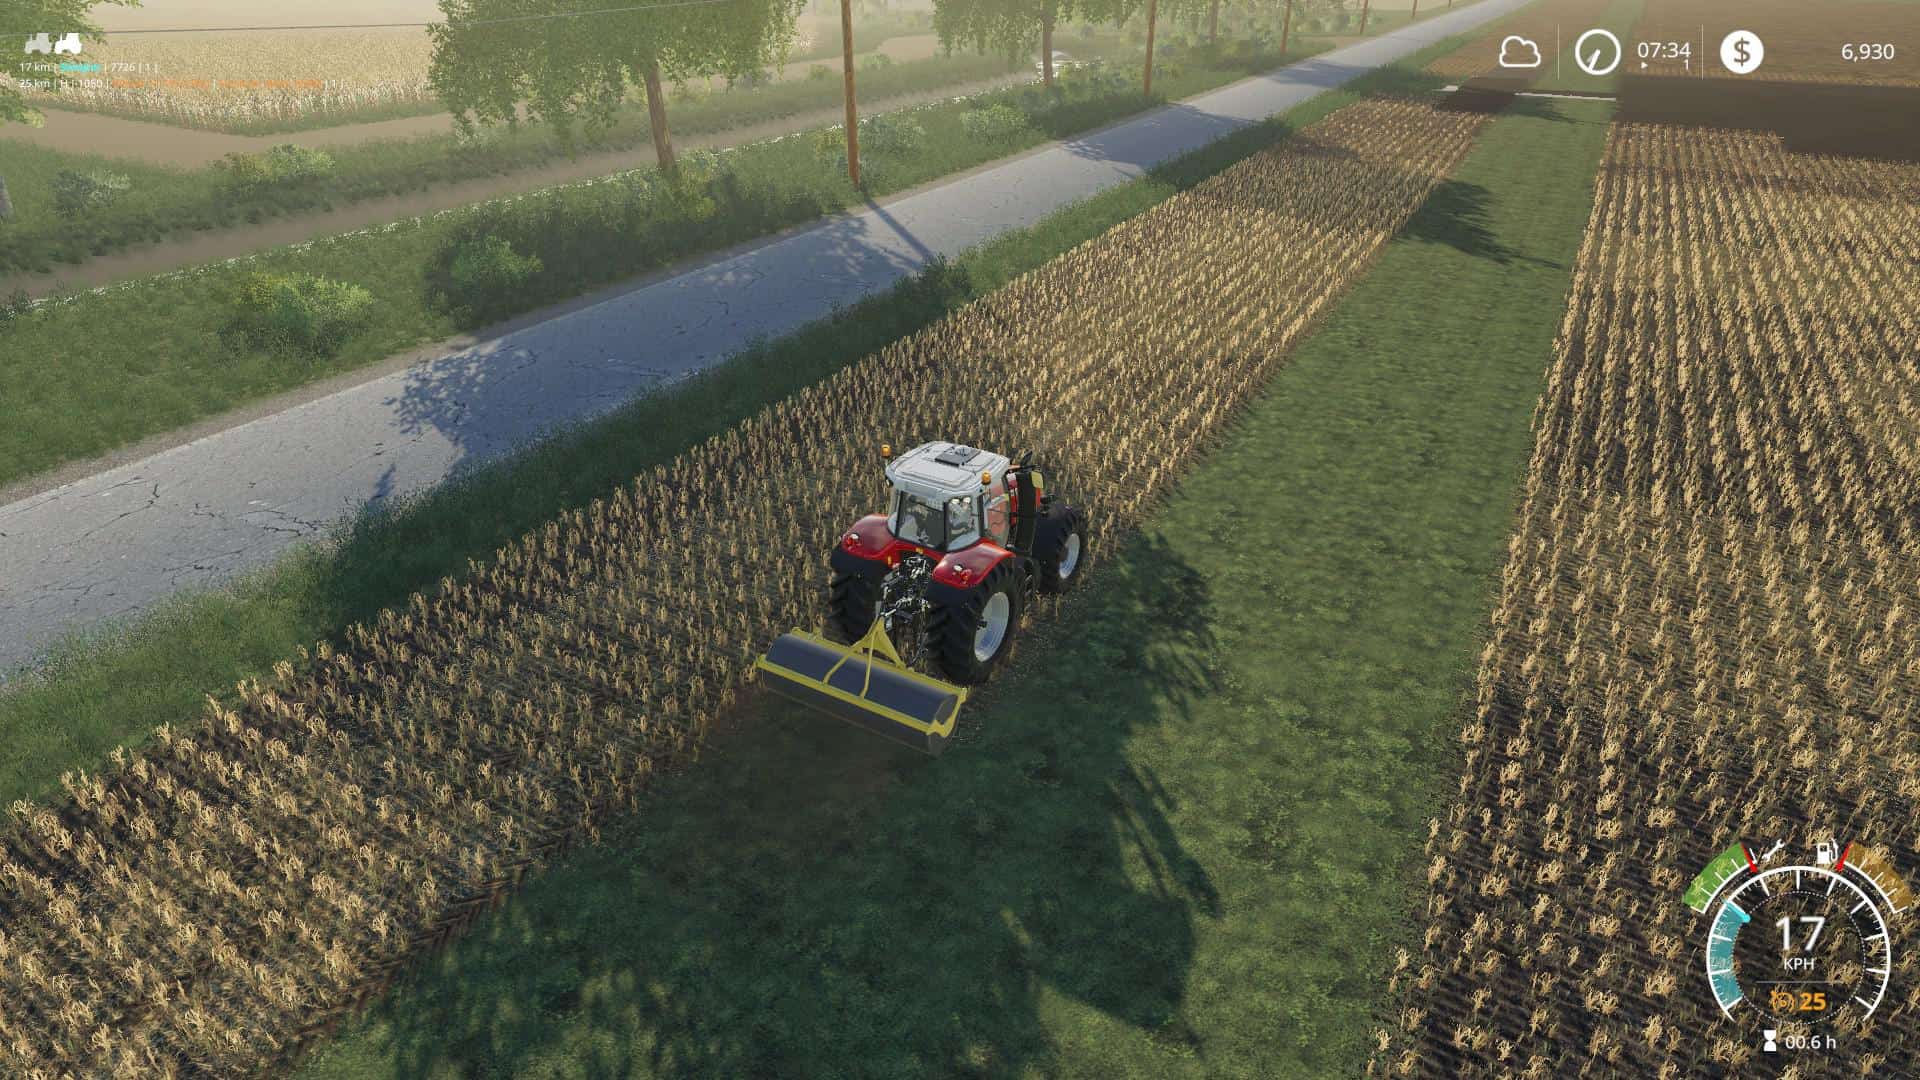 Fs19 Lizard R5000 V20 Fs 19 Implements And Tools Mod Download